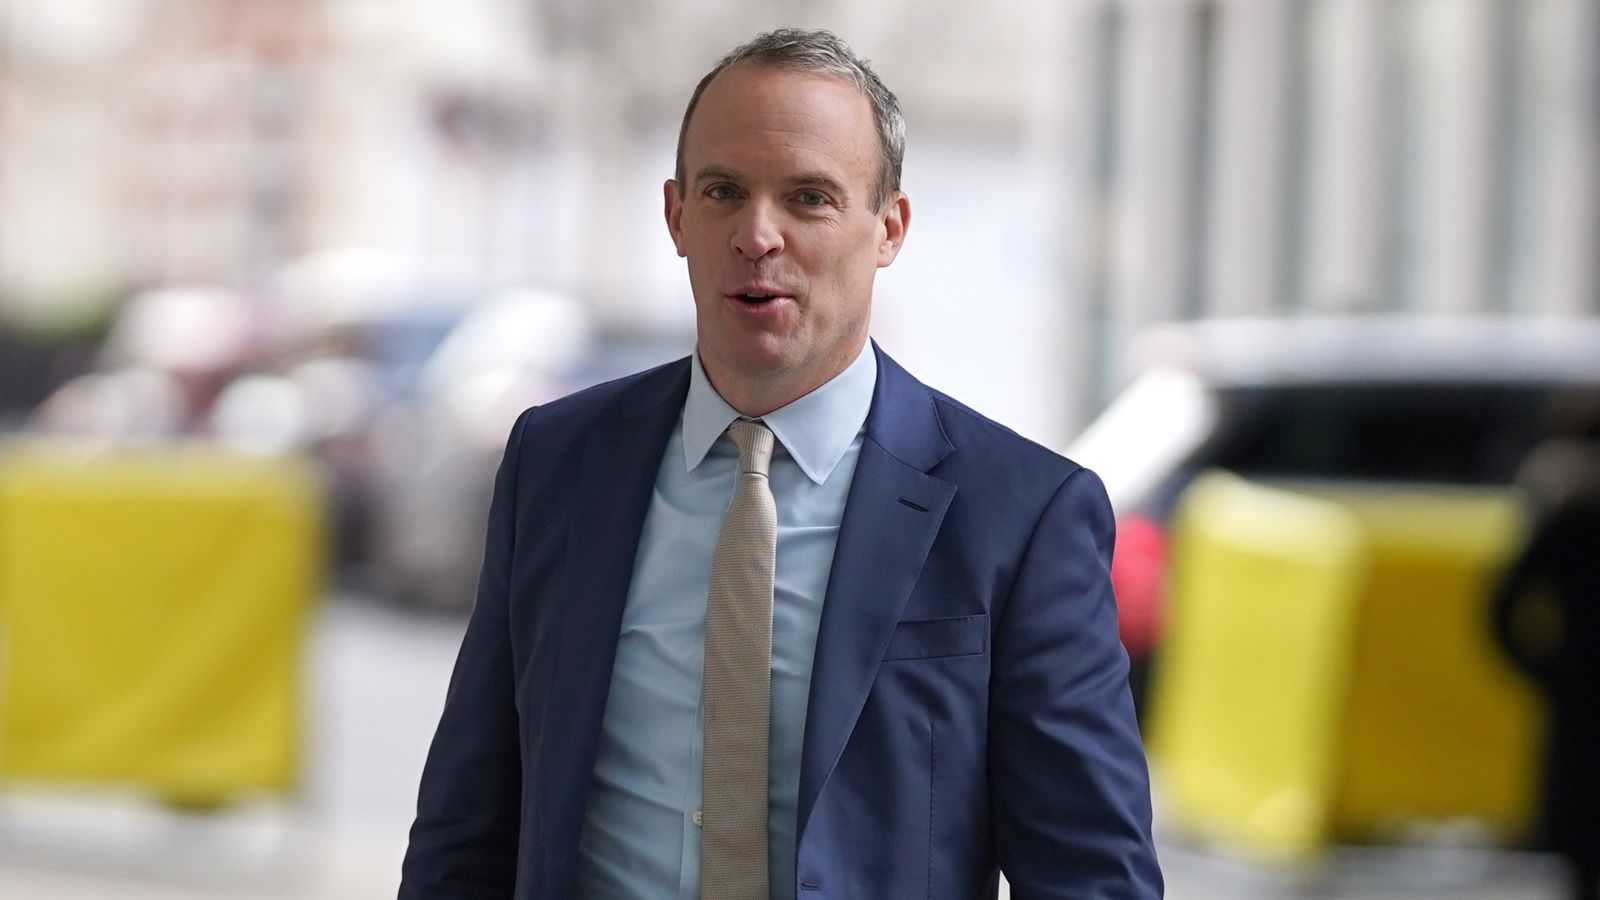 Dominic Raab: Justice secretary vows to resign if bullying claims upheld